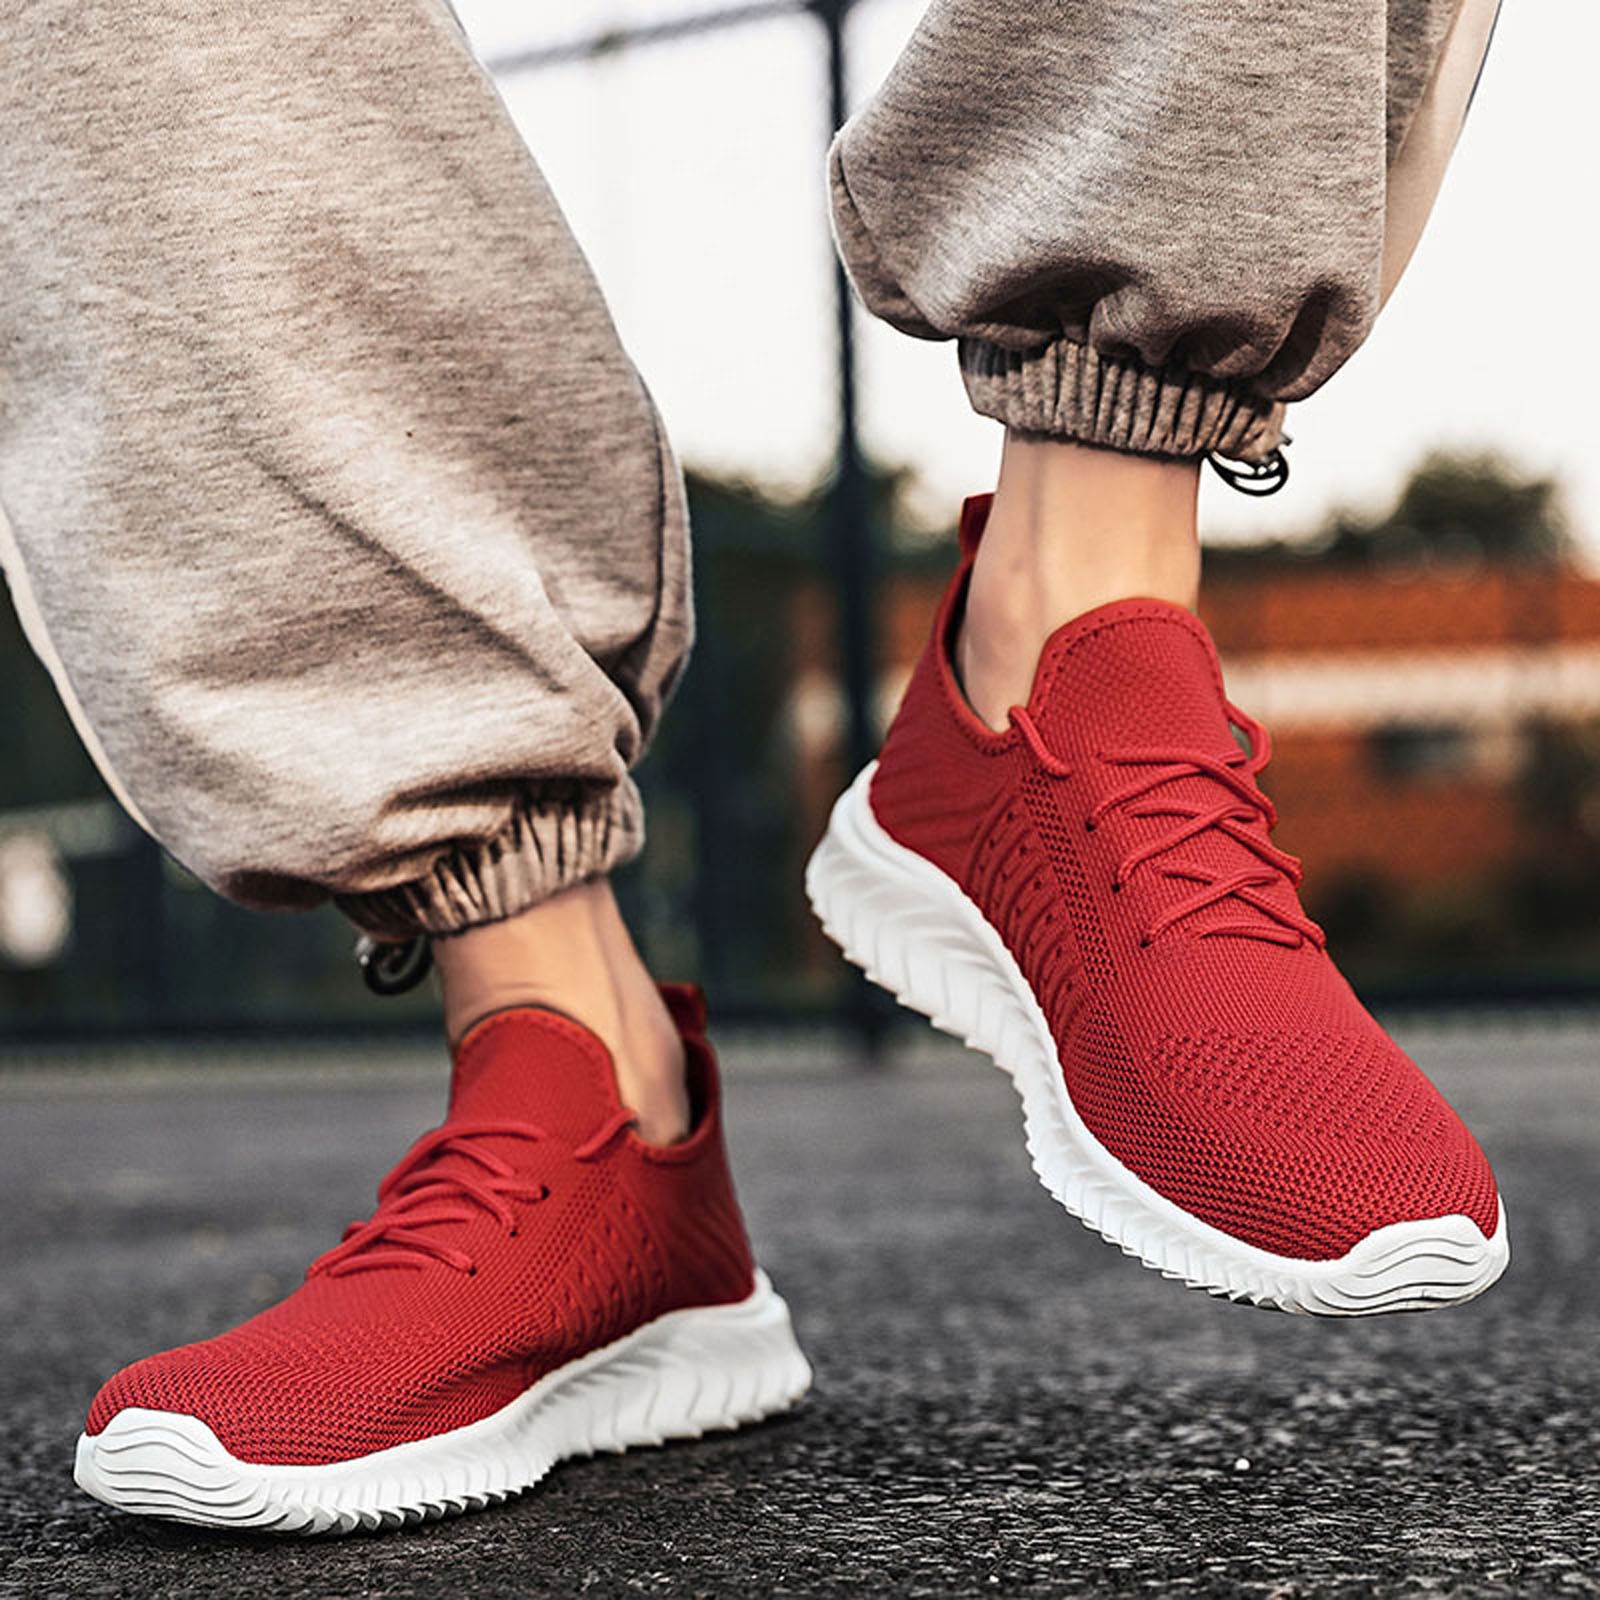 CBGELRT Shoes for Men Casual Men's Sneakers Work Tennis Shoes for Men Sneakers Men Lace Mesh Soft Fashion Color Bottom up Sport Shoes Casual Breathable Solid Men's Sneakers Male Red 45 - image 2 of 4